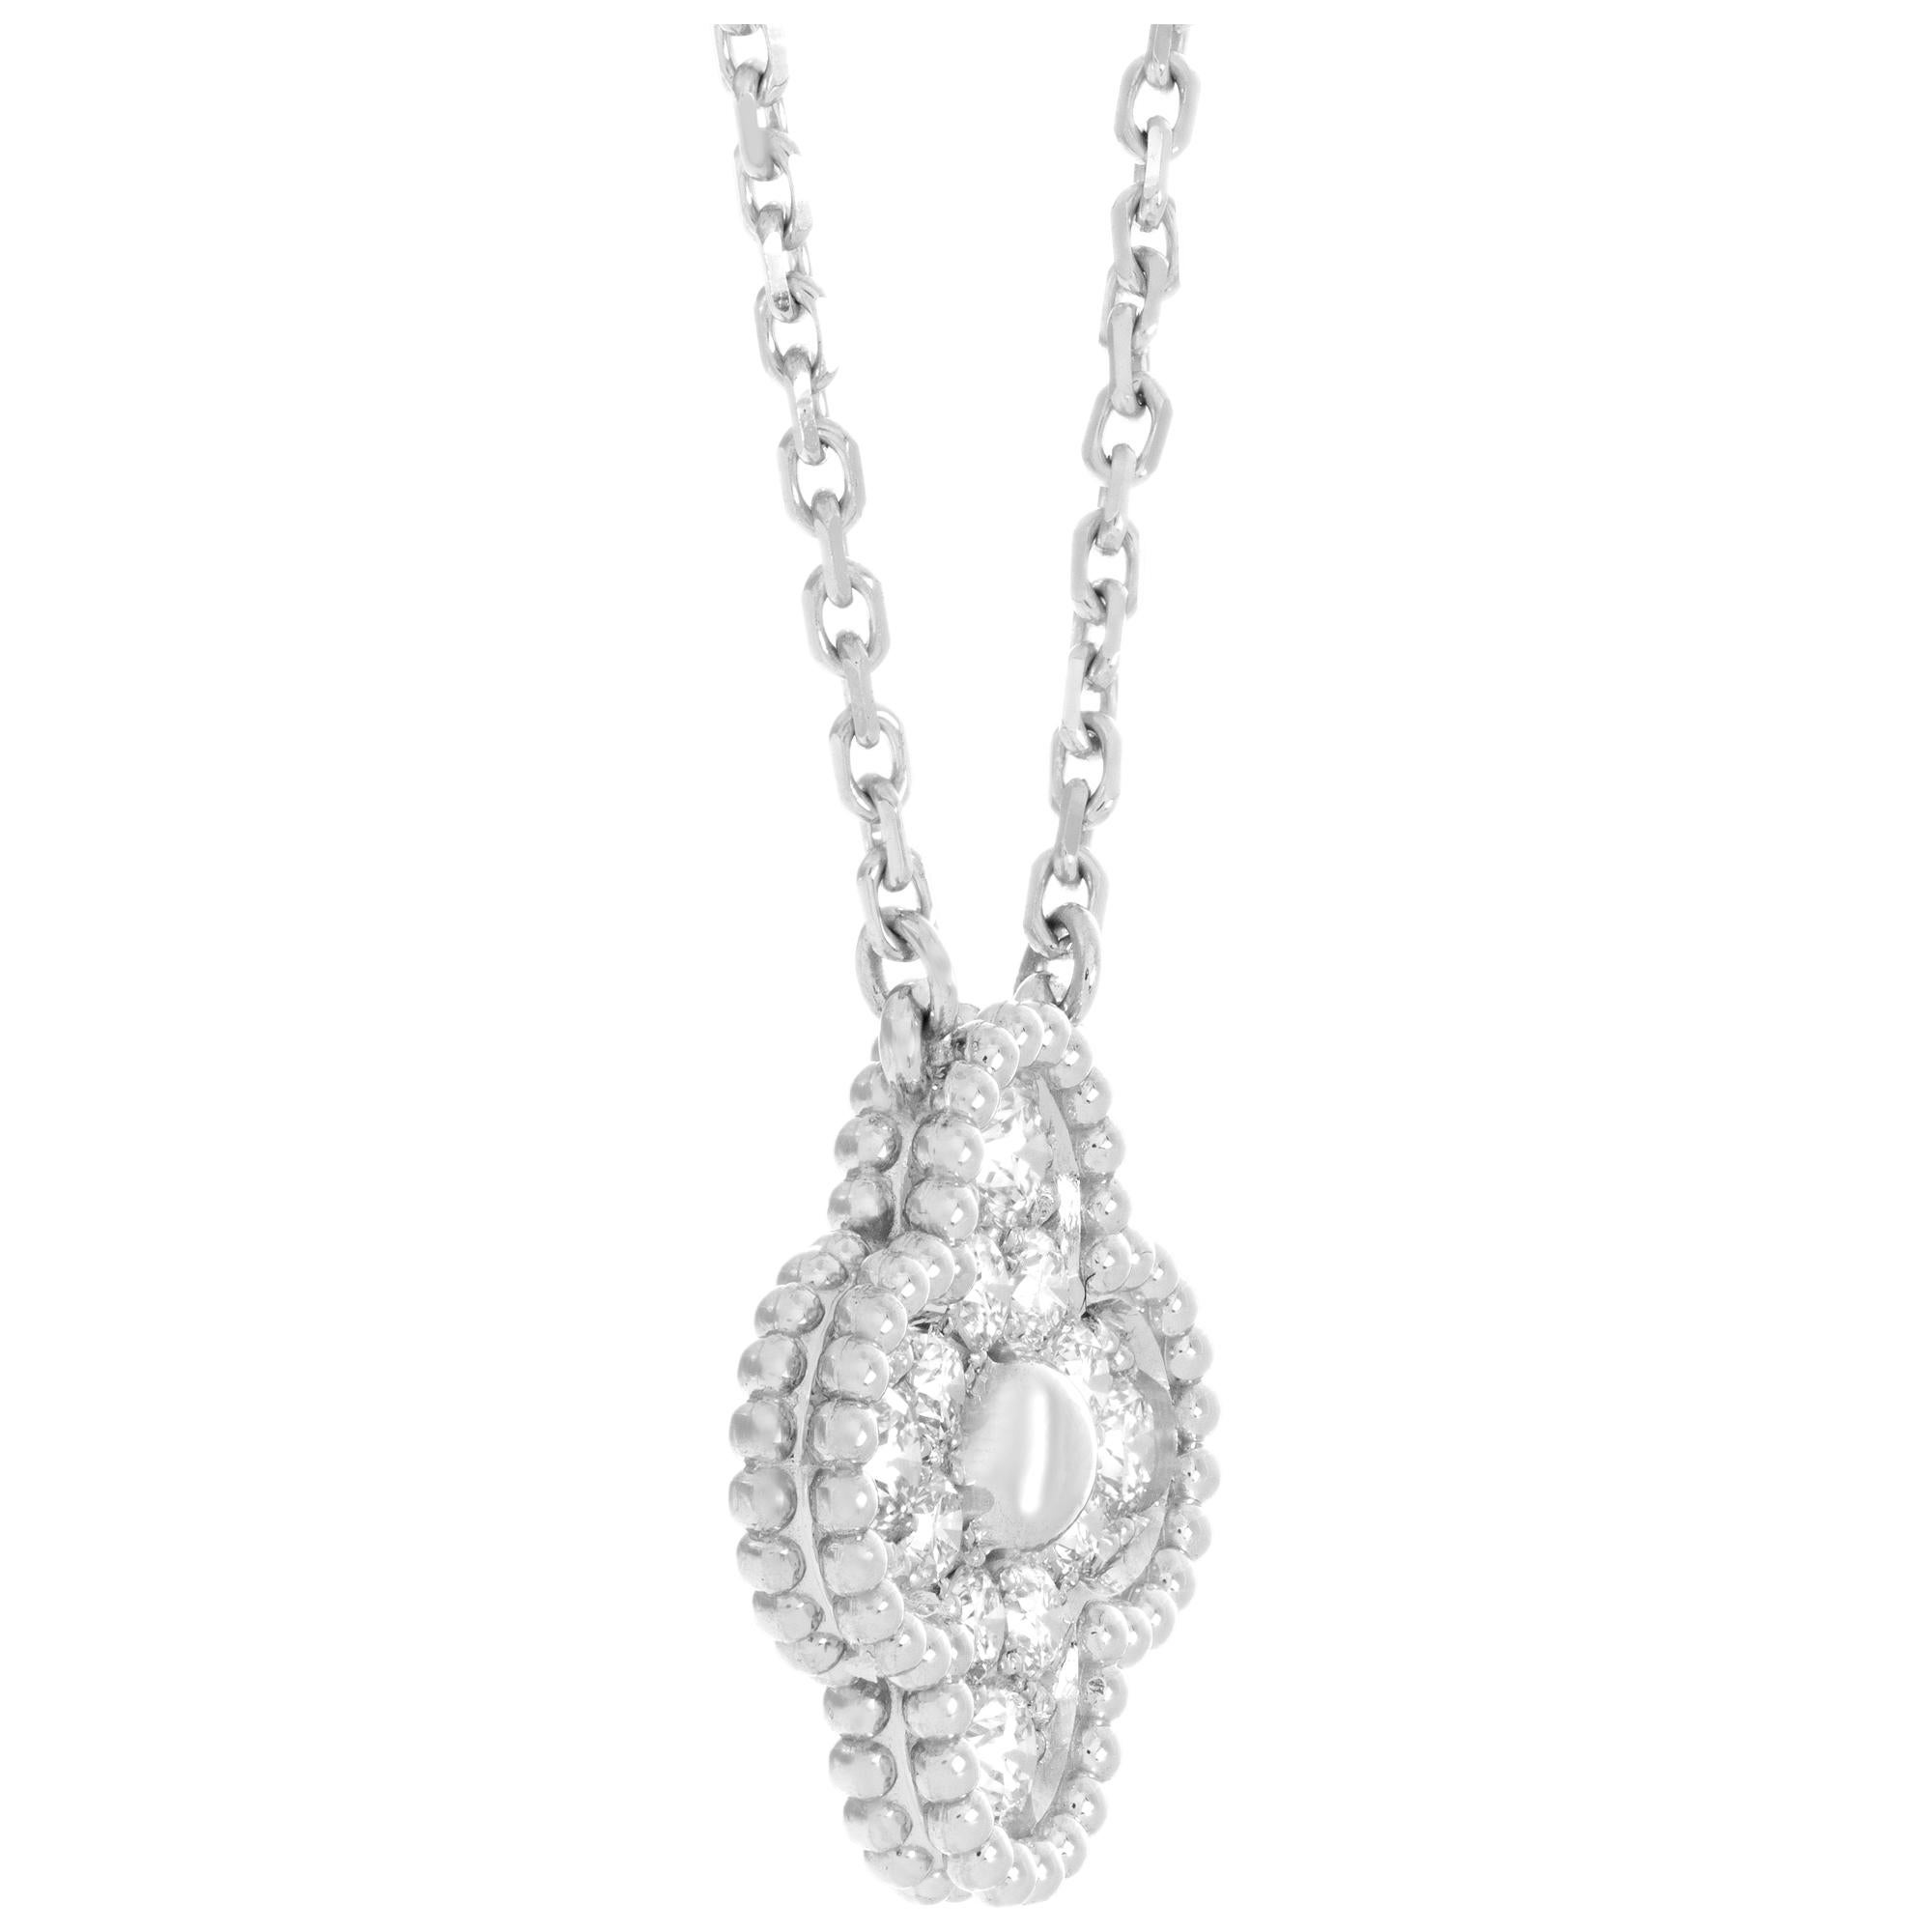 Pendant Necklace in 18k White Gold with 0.48 Ct in Diamonds, Van Cleef & Arpels 1